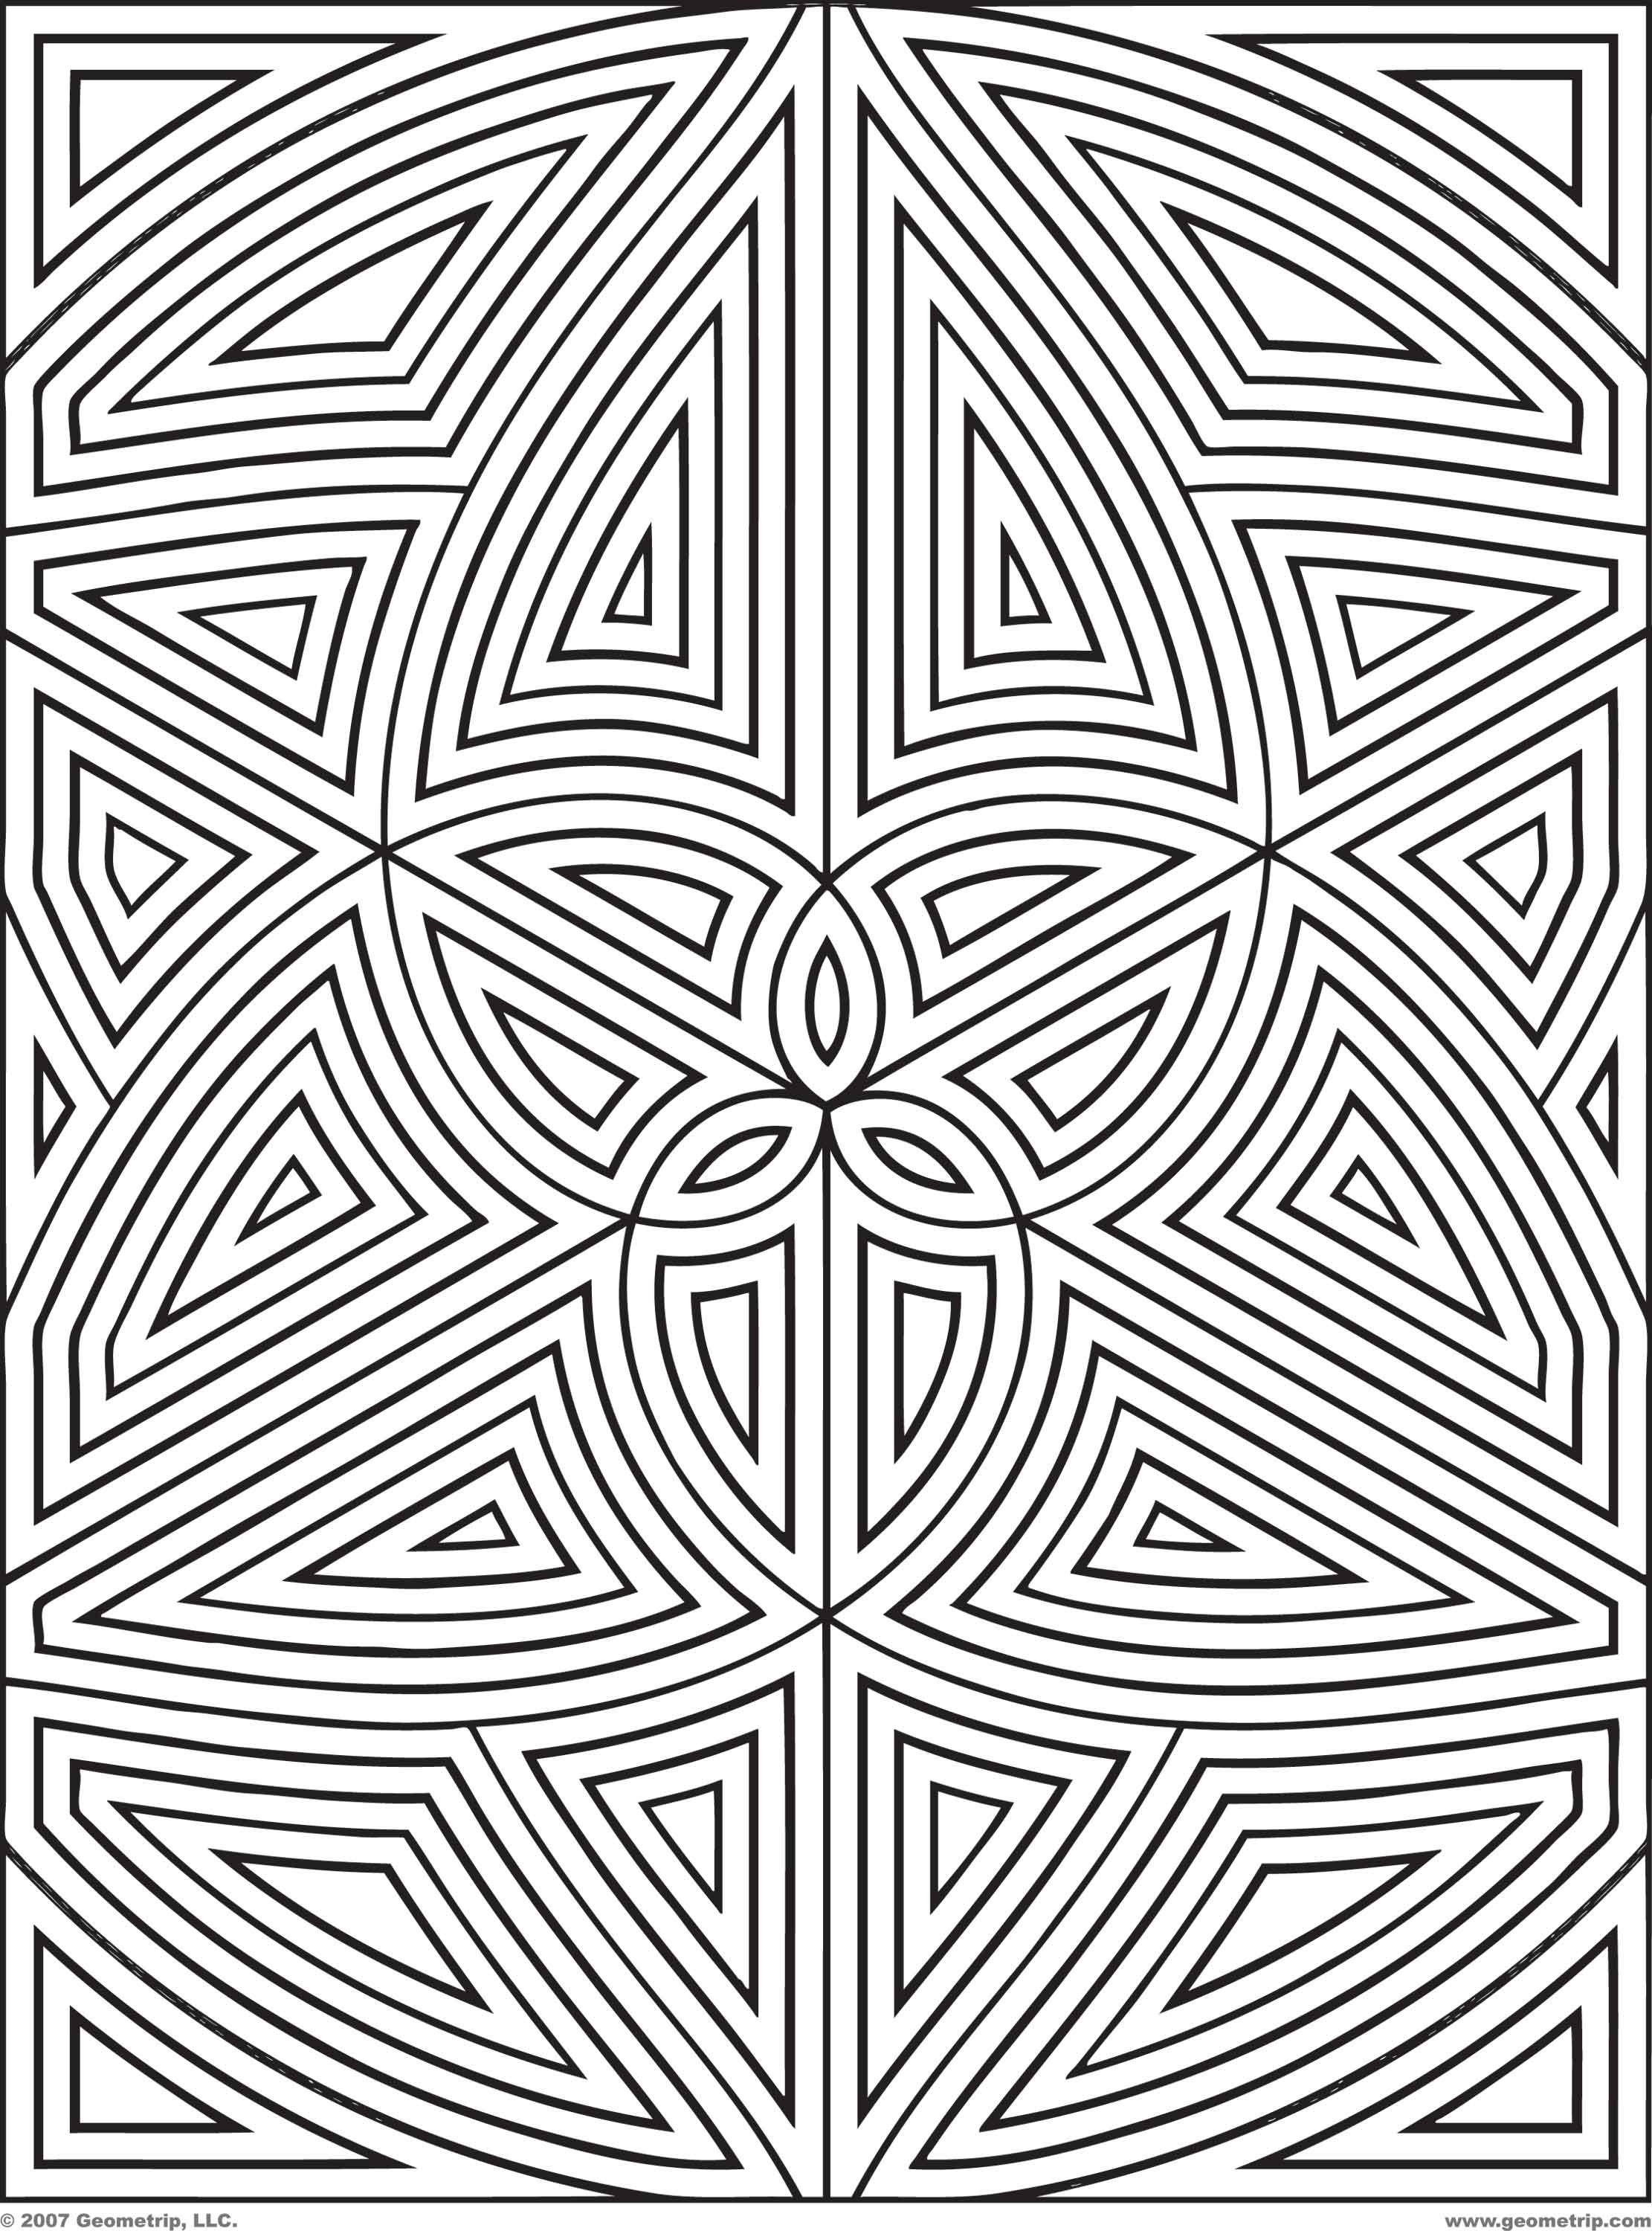 20 Free Pictures for: Geometric Coloring Pages. Temoon.us